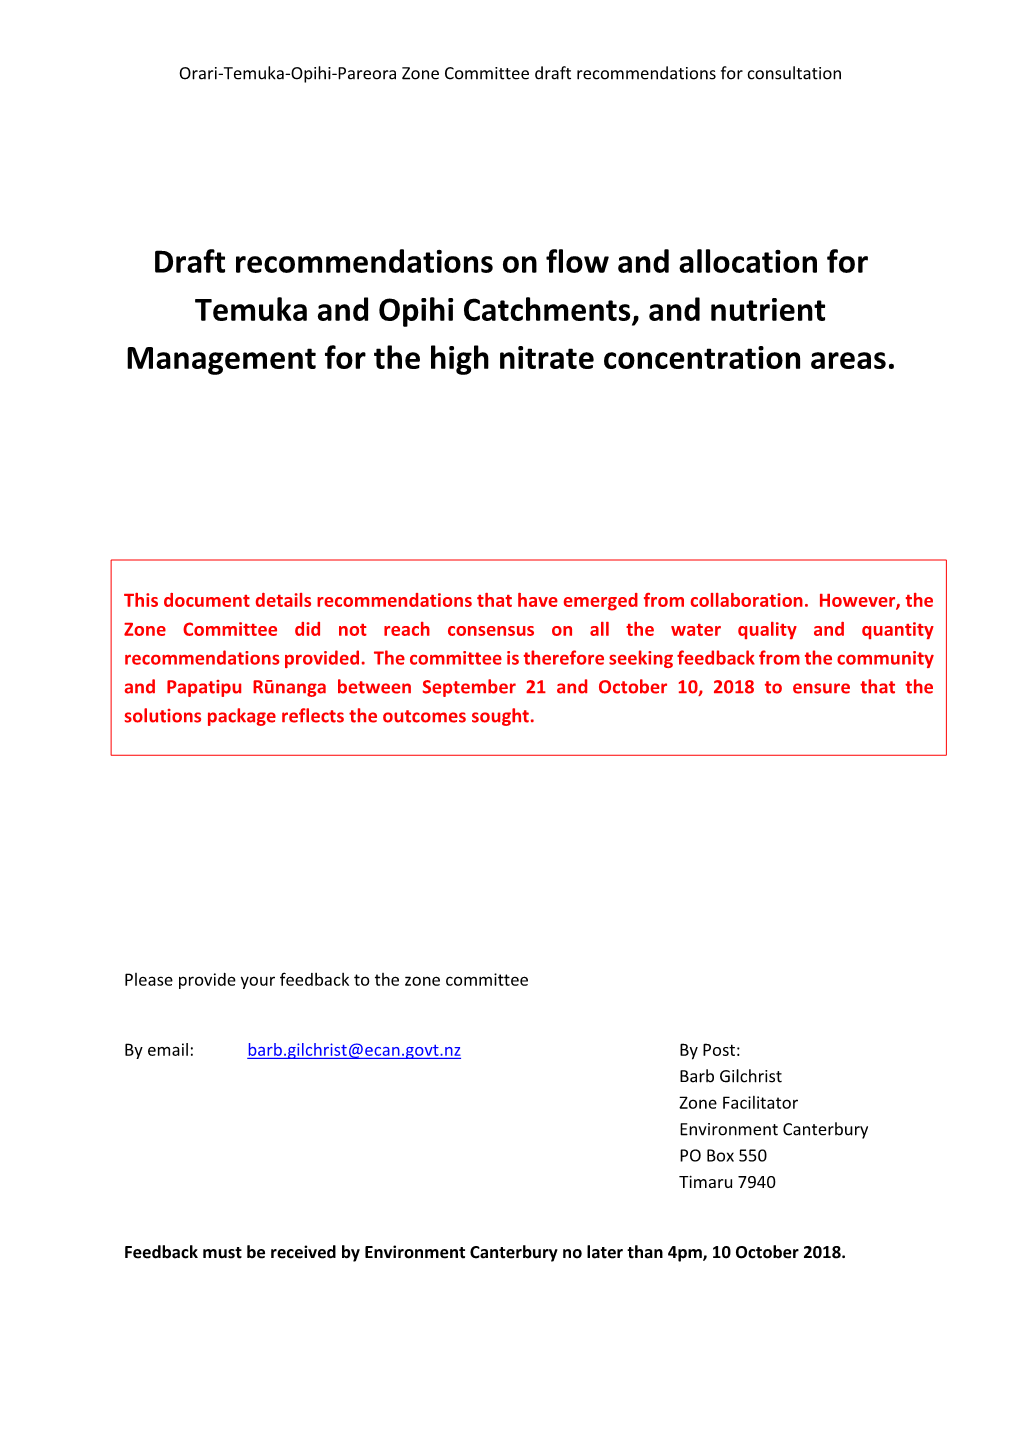 Draft Recommendations on Flow and Allocation for Temuka and Opihi Catchments, and Nutrient Management for the High Nitrate Concentration Areas